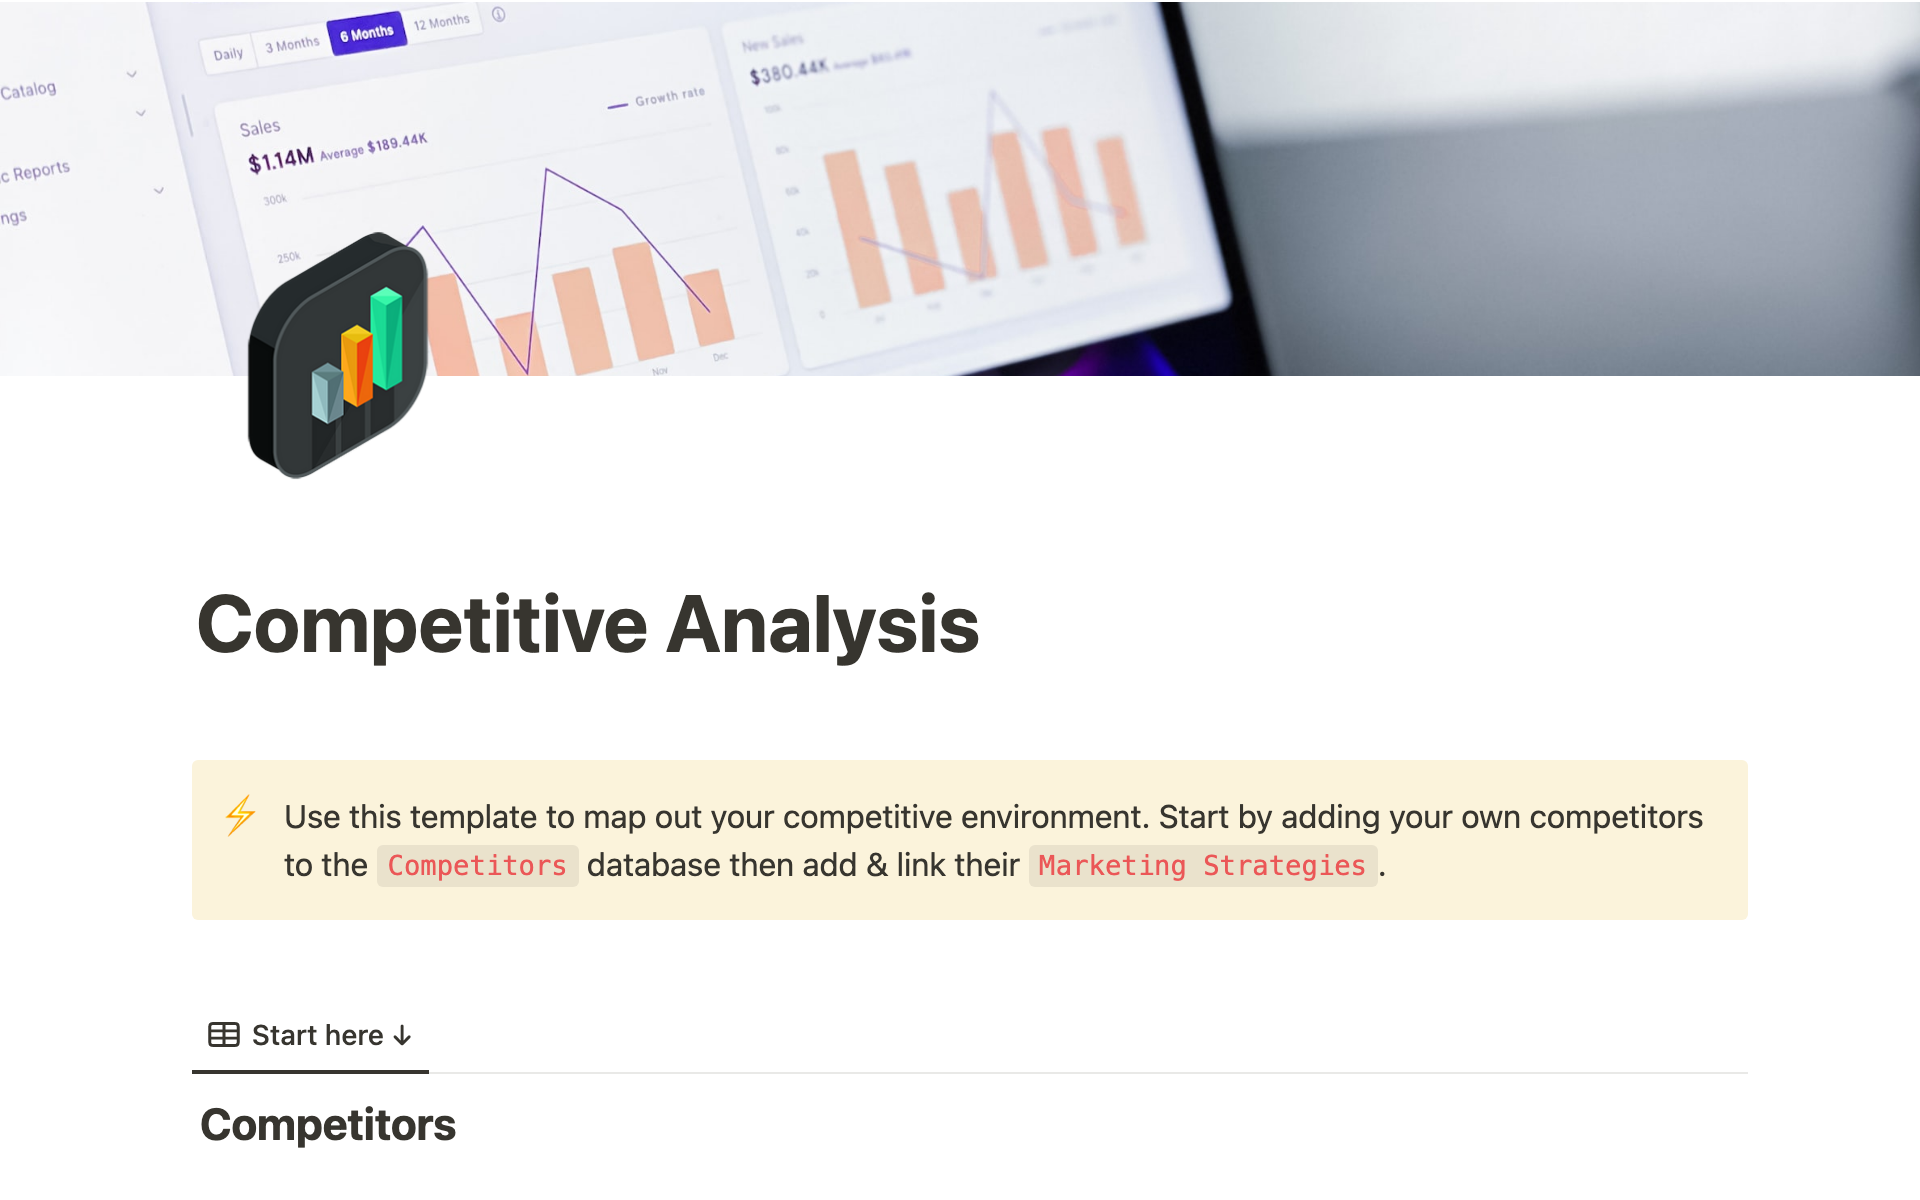 A screenshot of a SWOT analysis page in Notion.